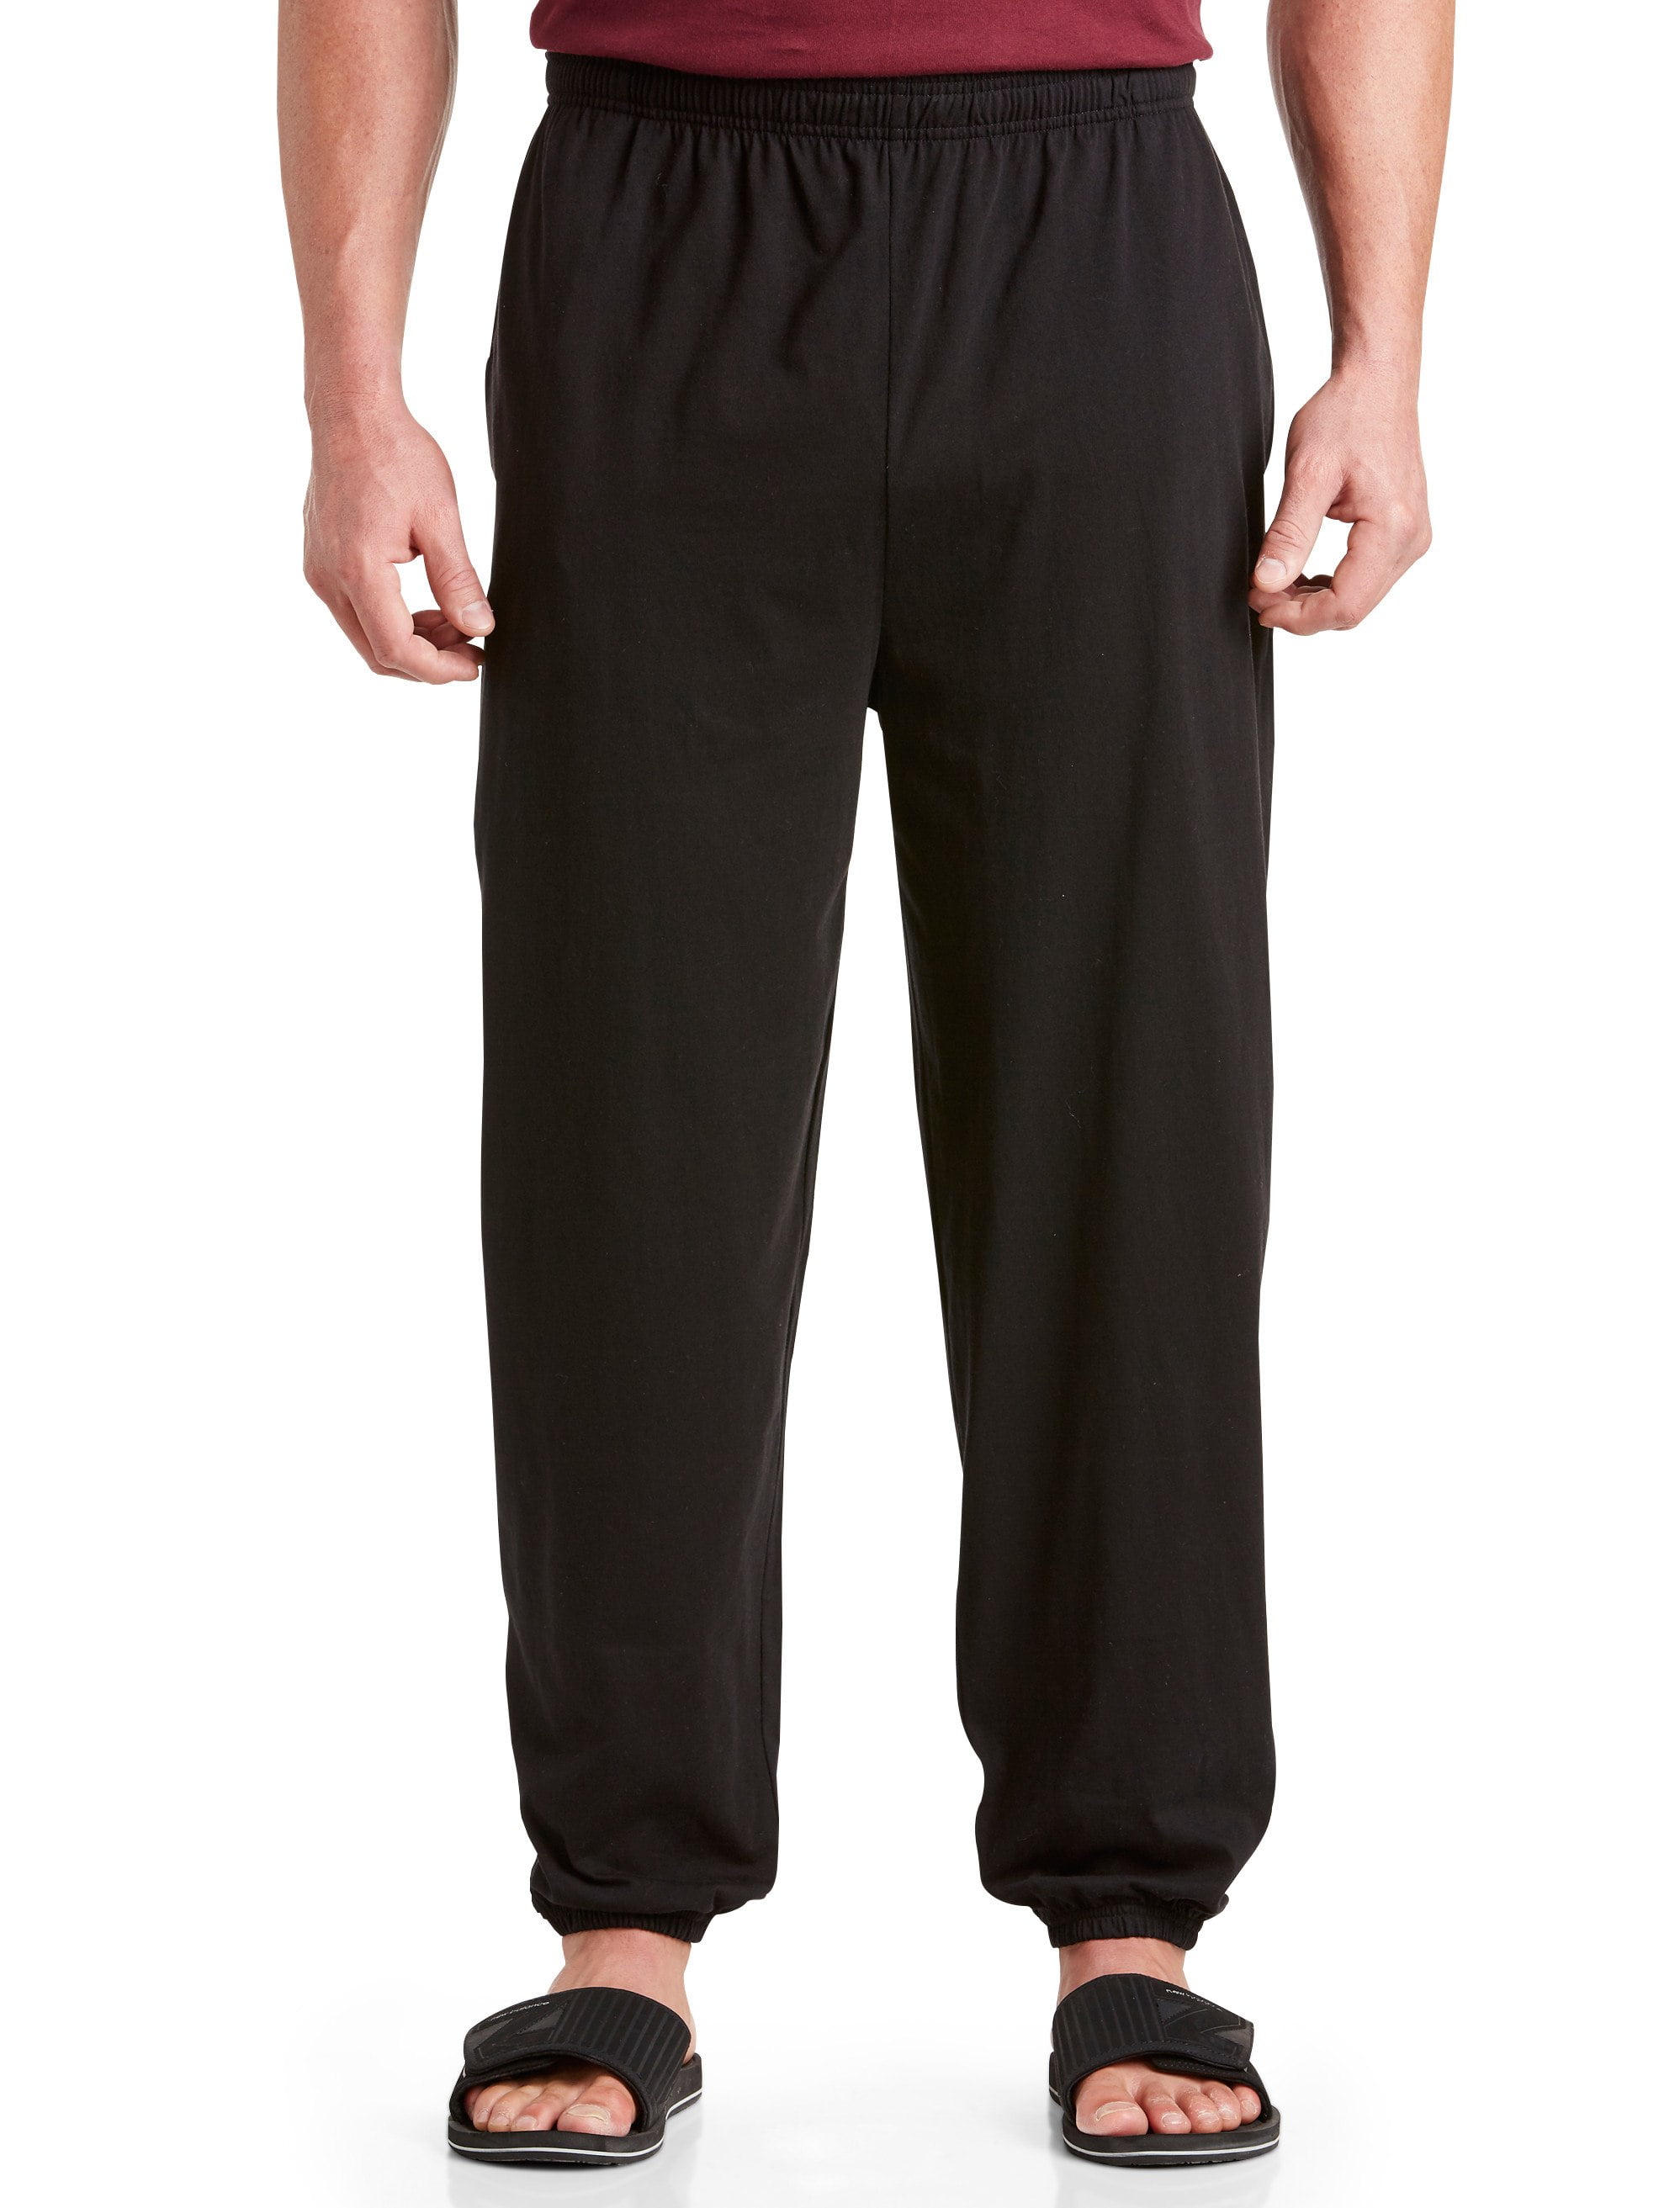 Hanes Mens X-Temp Jersey Pant with ComfortSoft Waistband